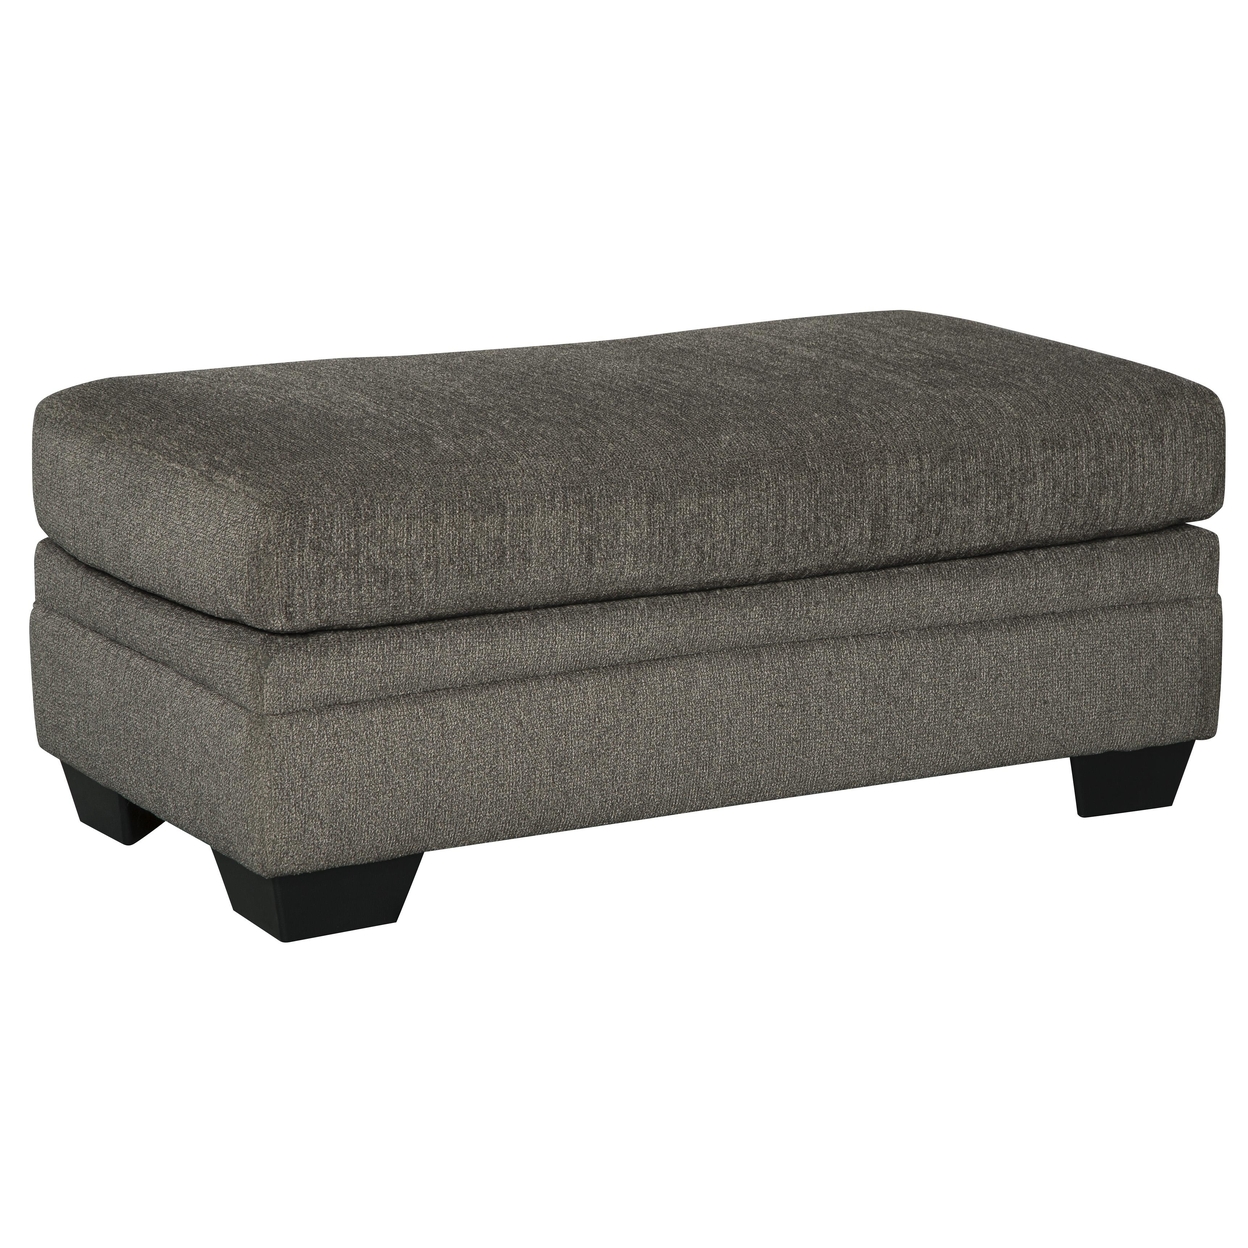 Wooden Ottoman With Fabric Upholstery And Tapered Block Legs, Gray- Saltoro Sherpi